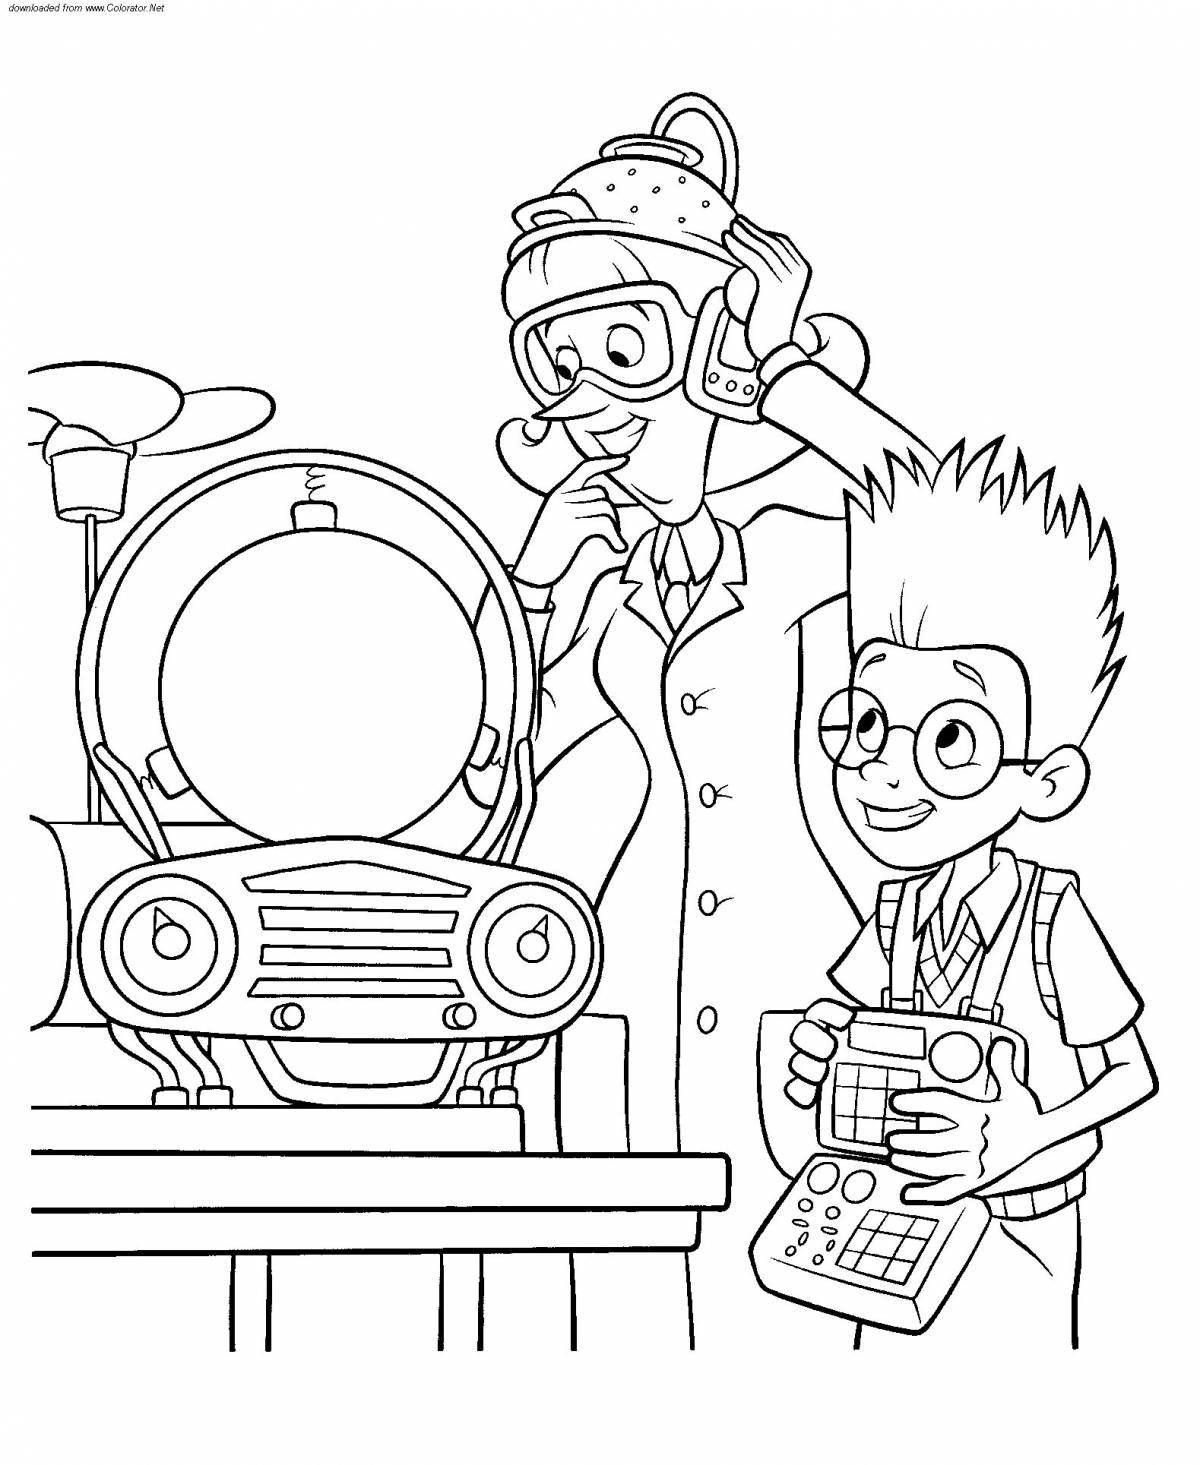 Colored children's inventions coloring book